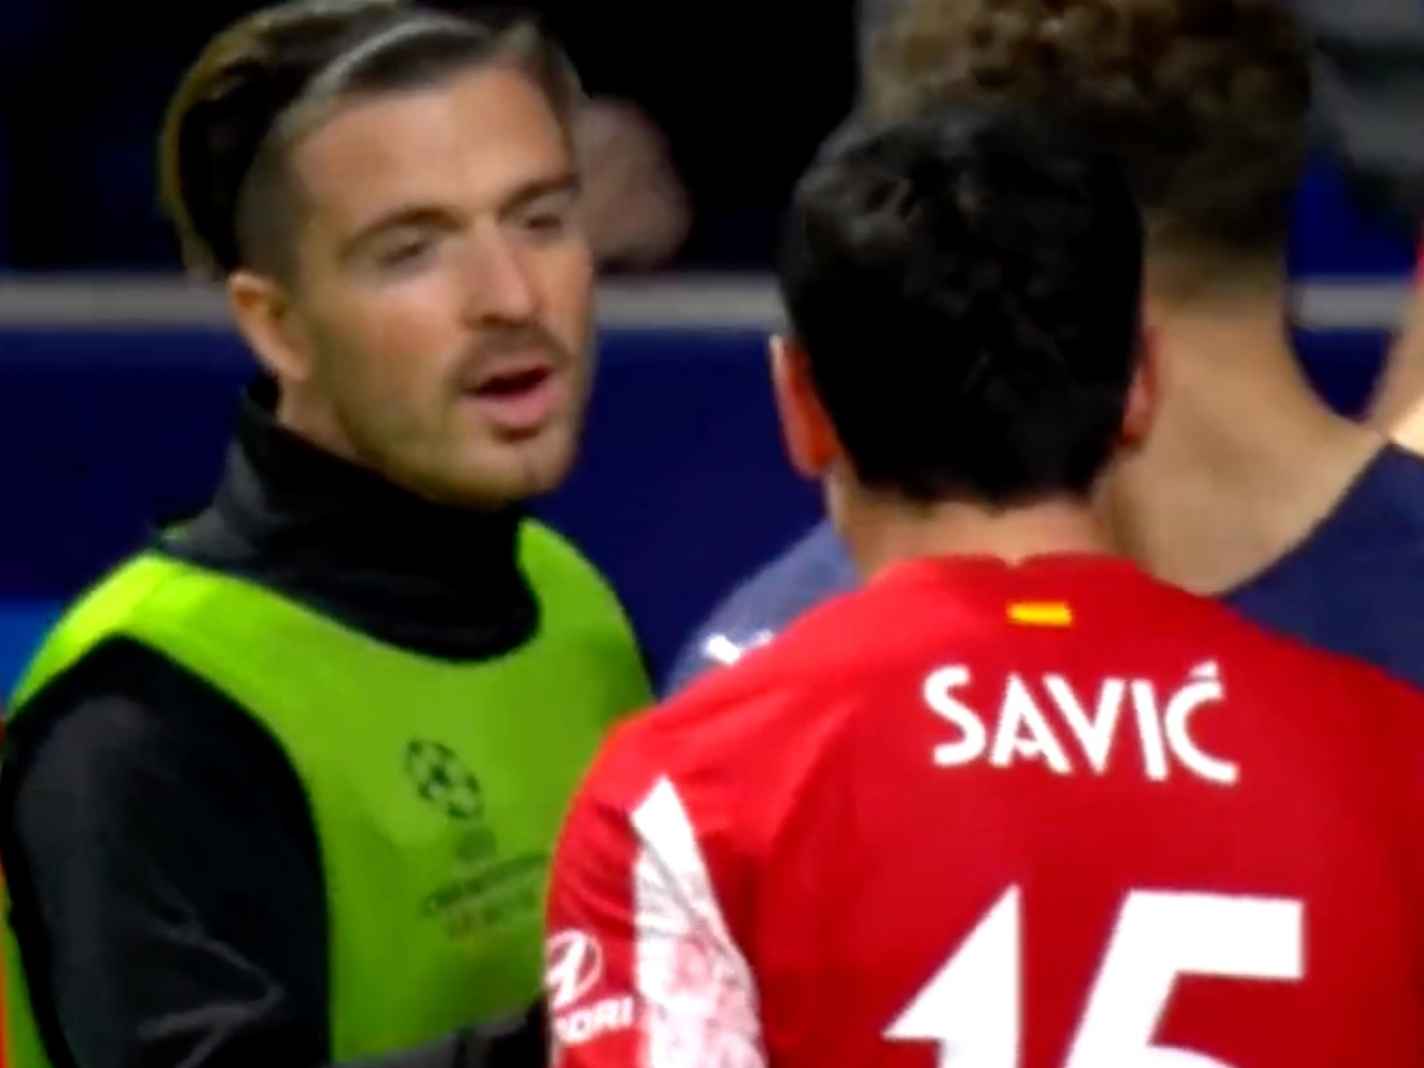 Jack Grealish and Stefan Savic were involved in a heated moment during Atletico v Man City